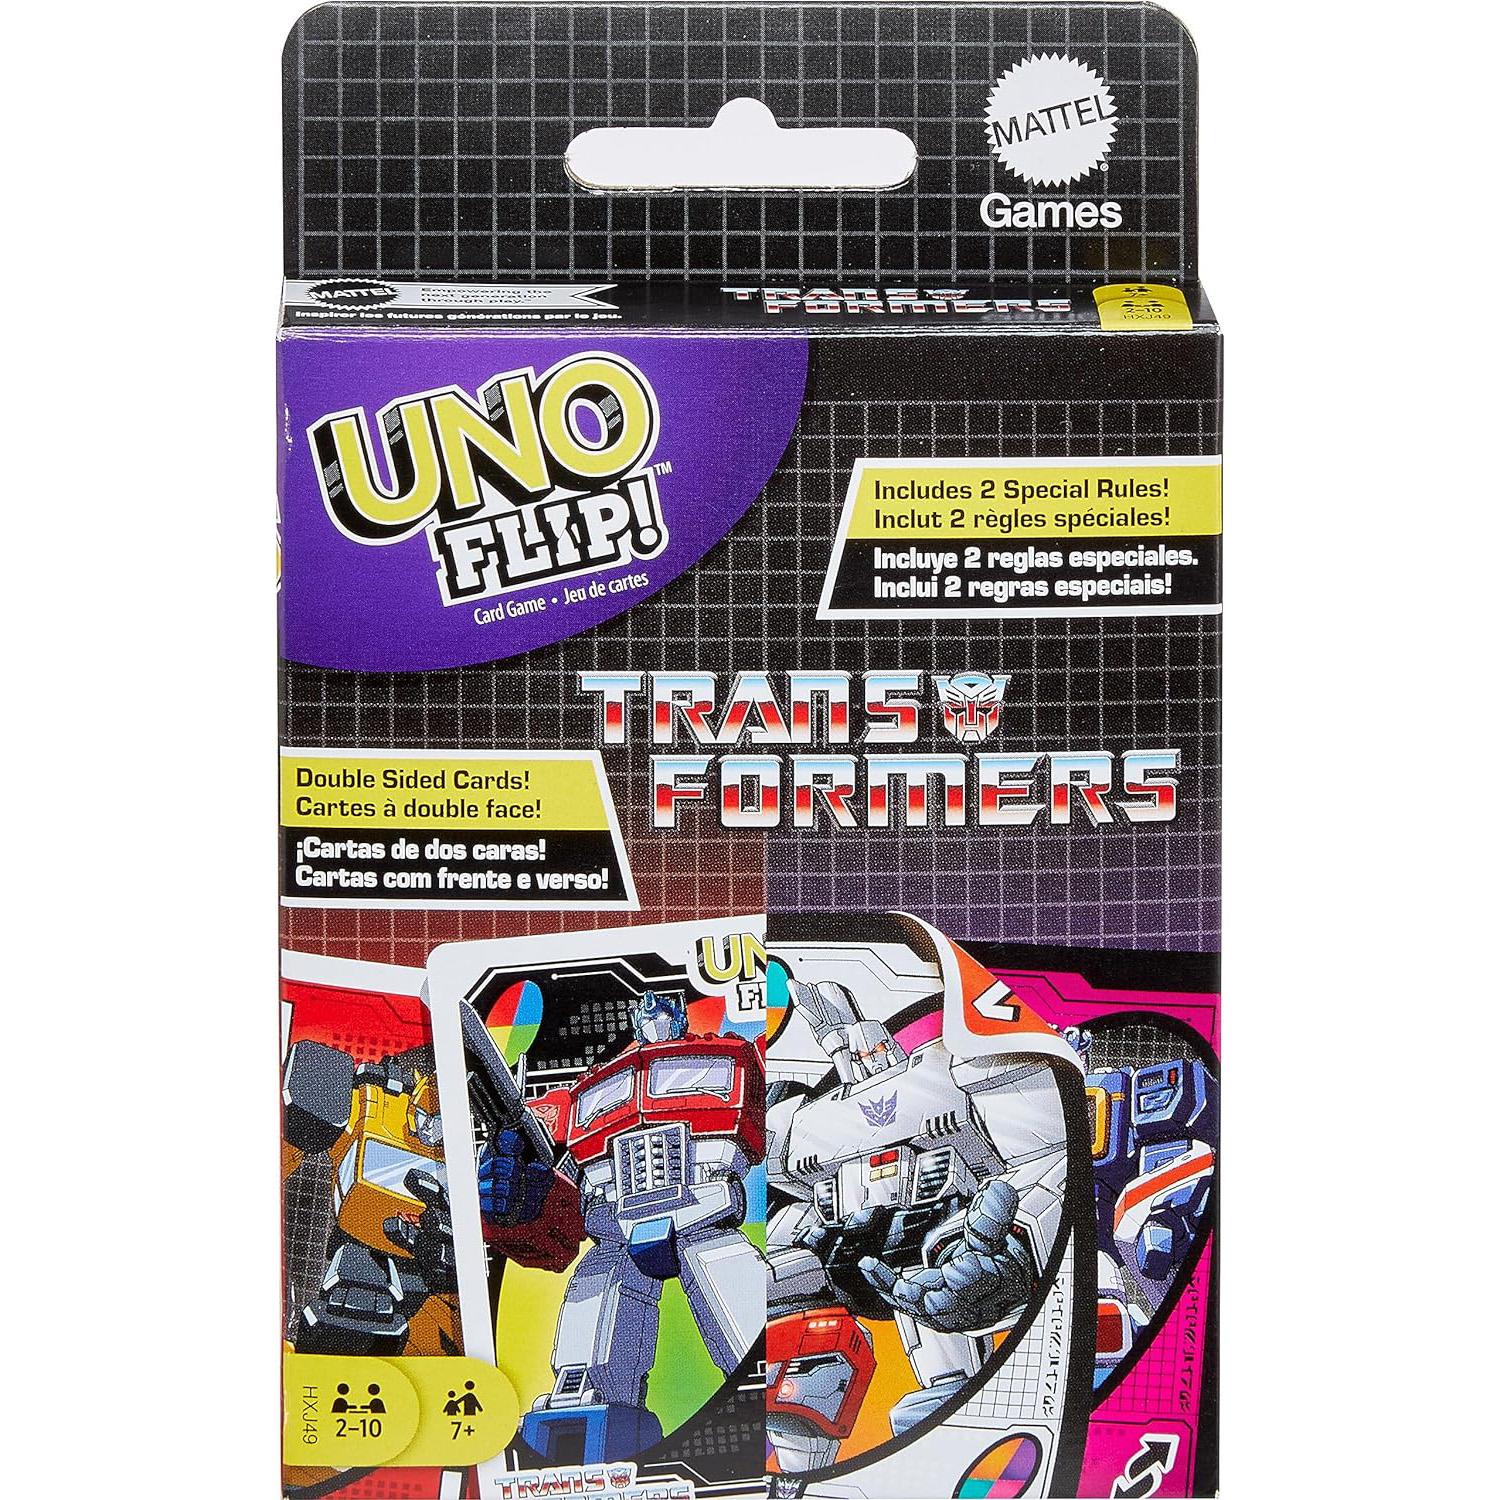 Mattel Games UNO Flip Transformers Card Game for $6.49